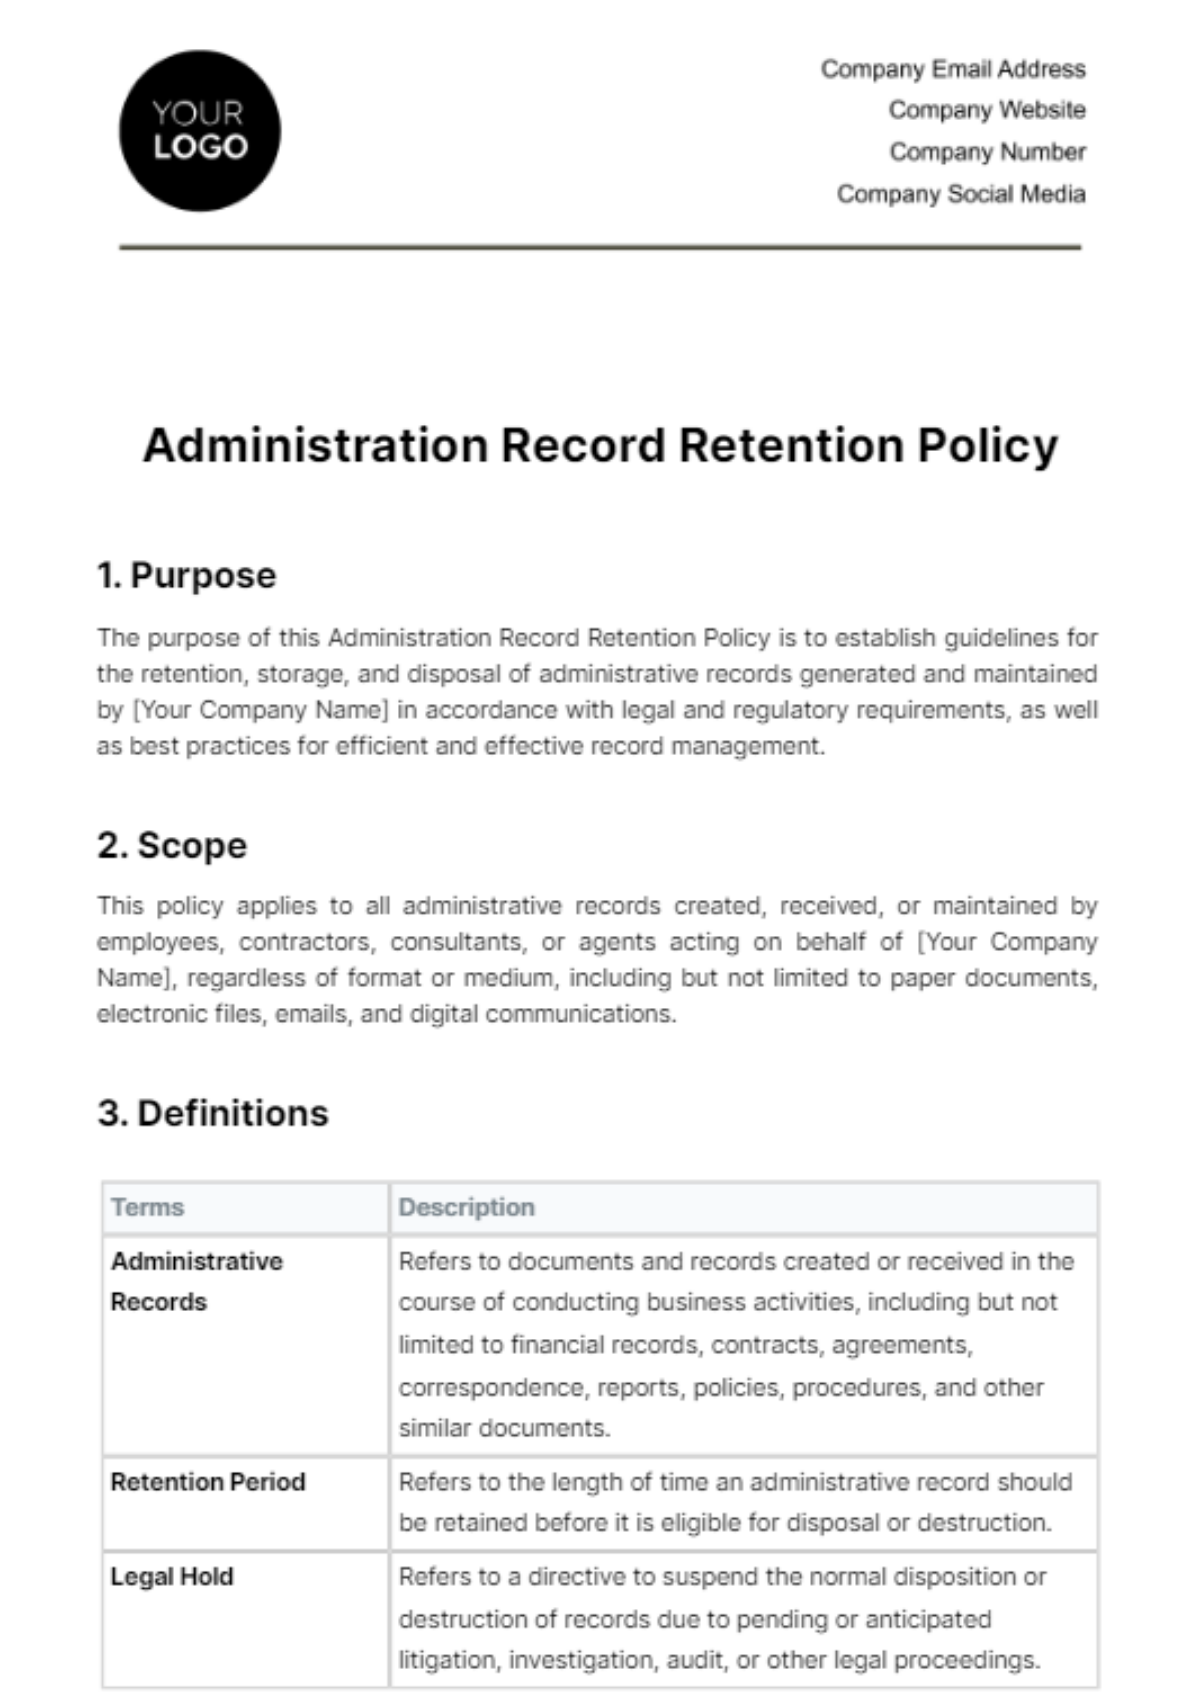 Administration Record Retention Policy Template